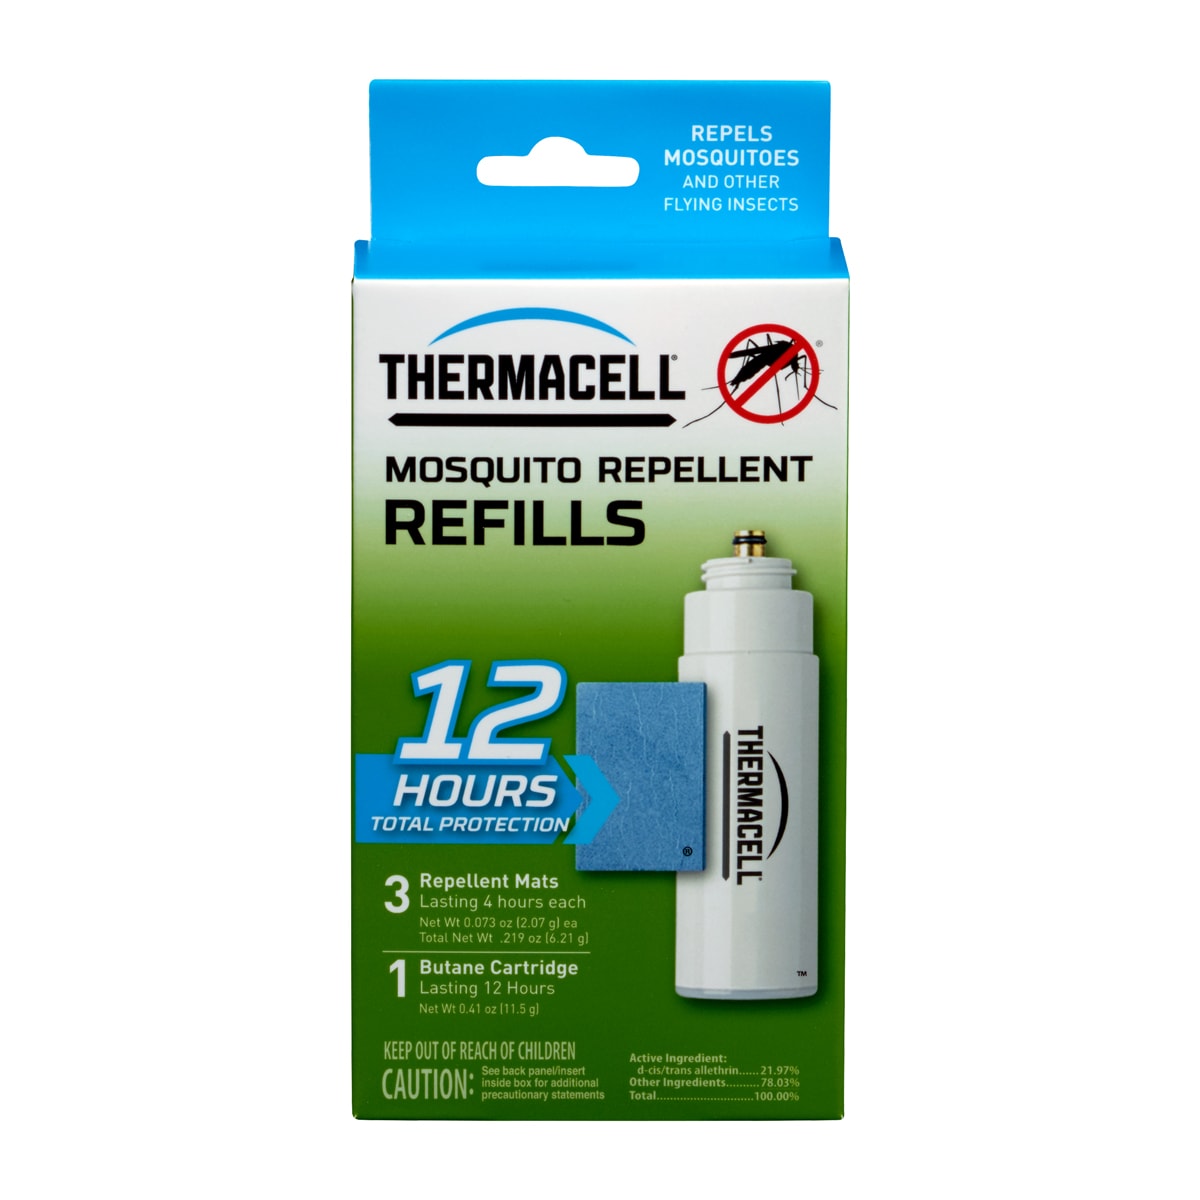  Thermacell Mosquito Repellent Refills; Earth Scent; Compatible  with Any Fuel-Powered Thermacell Repeller; Highly Effective, Long Lasting,  No Spray or Mess; 15 Foot Zone of Mosquito Protection : Thermacell: Patio,  Lawn 